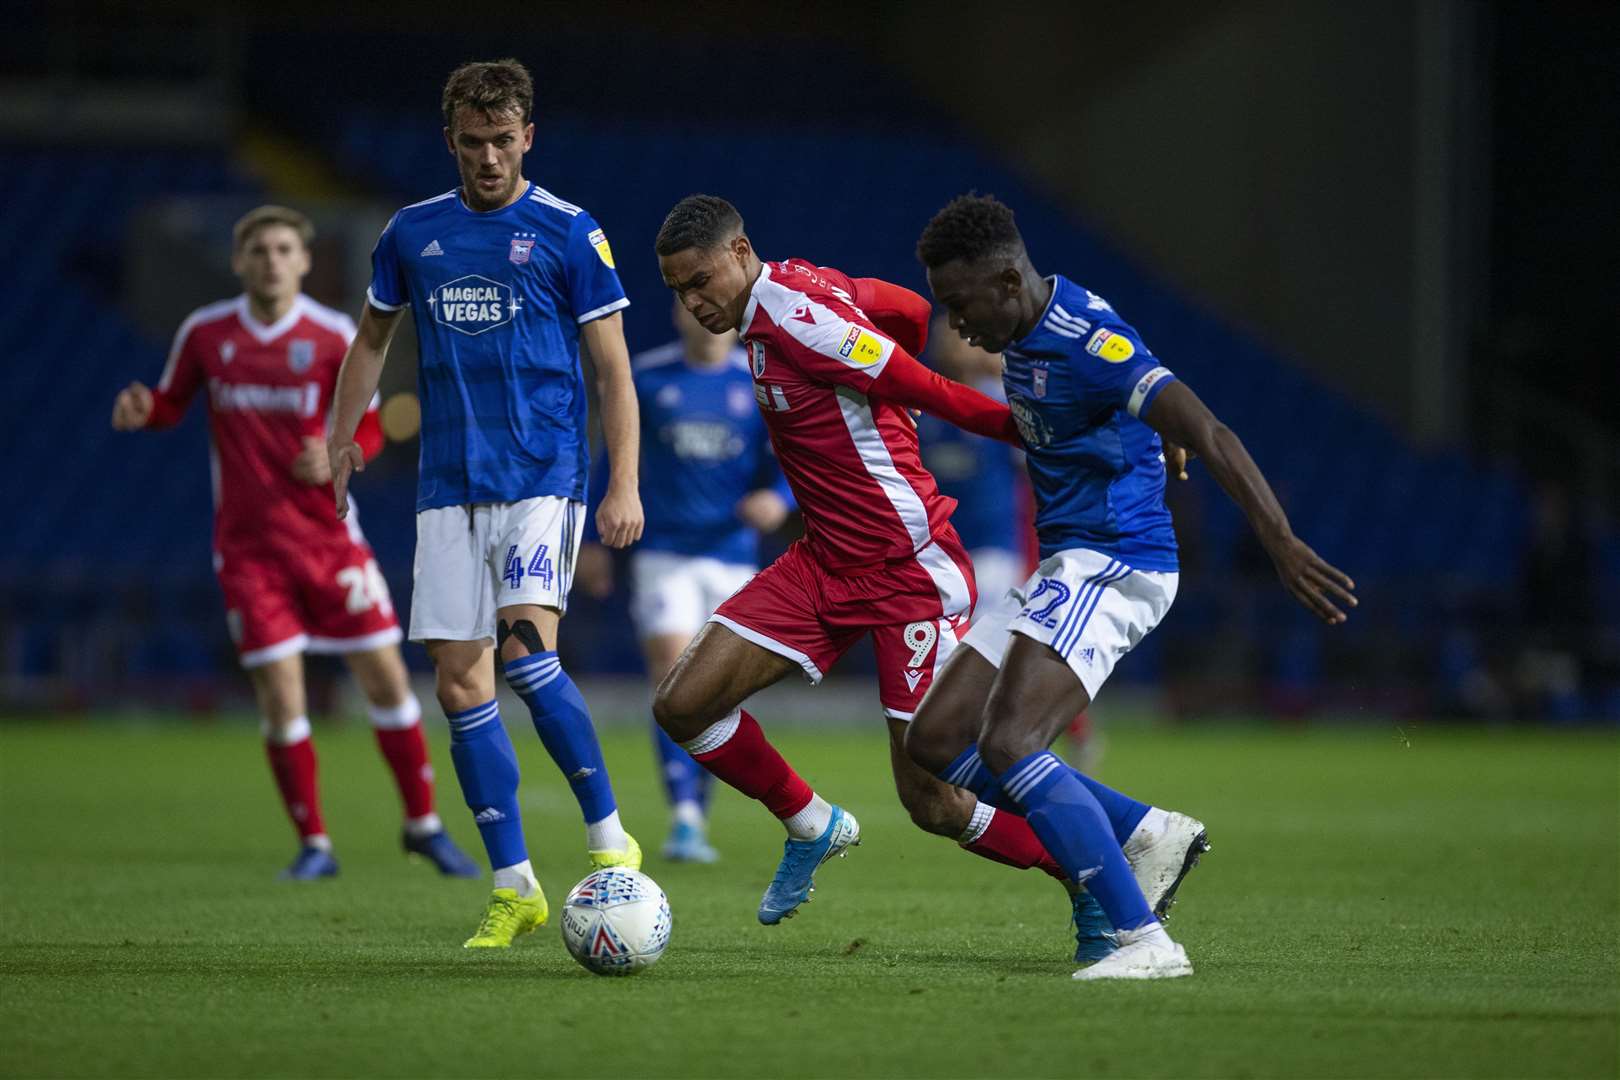 Mikael Mandron started upfront for the Gills in their EFL Trophy match Picture: @KentProImages